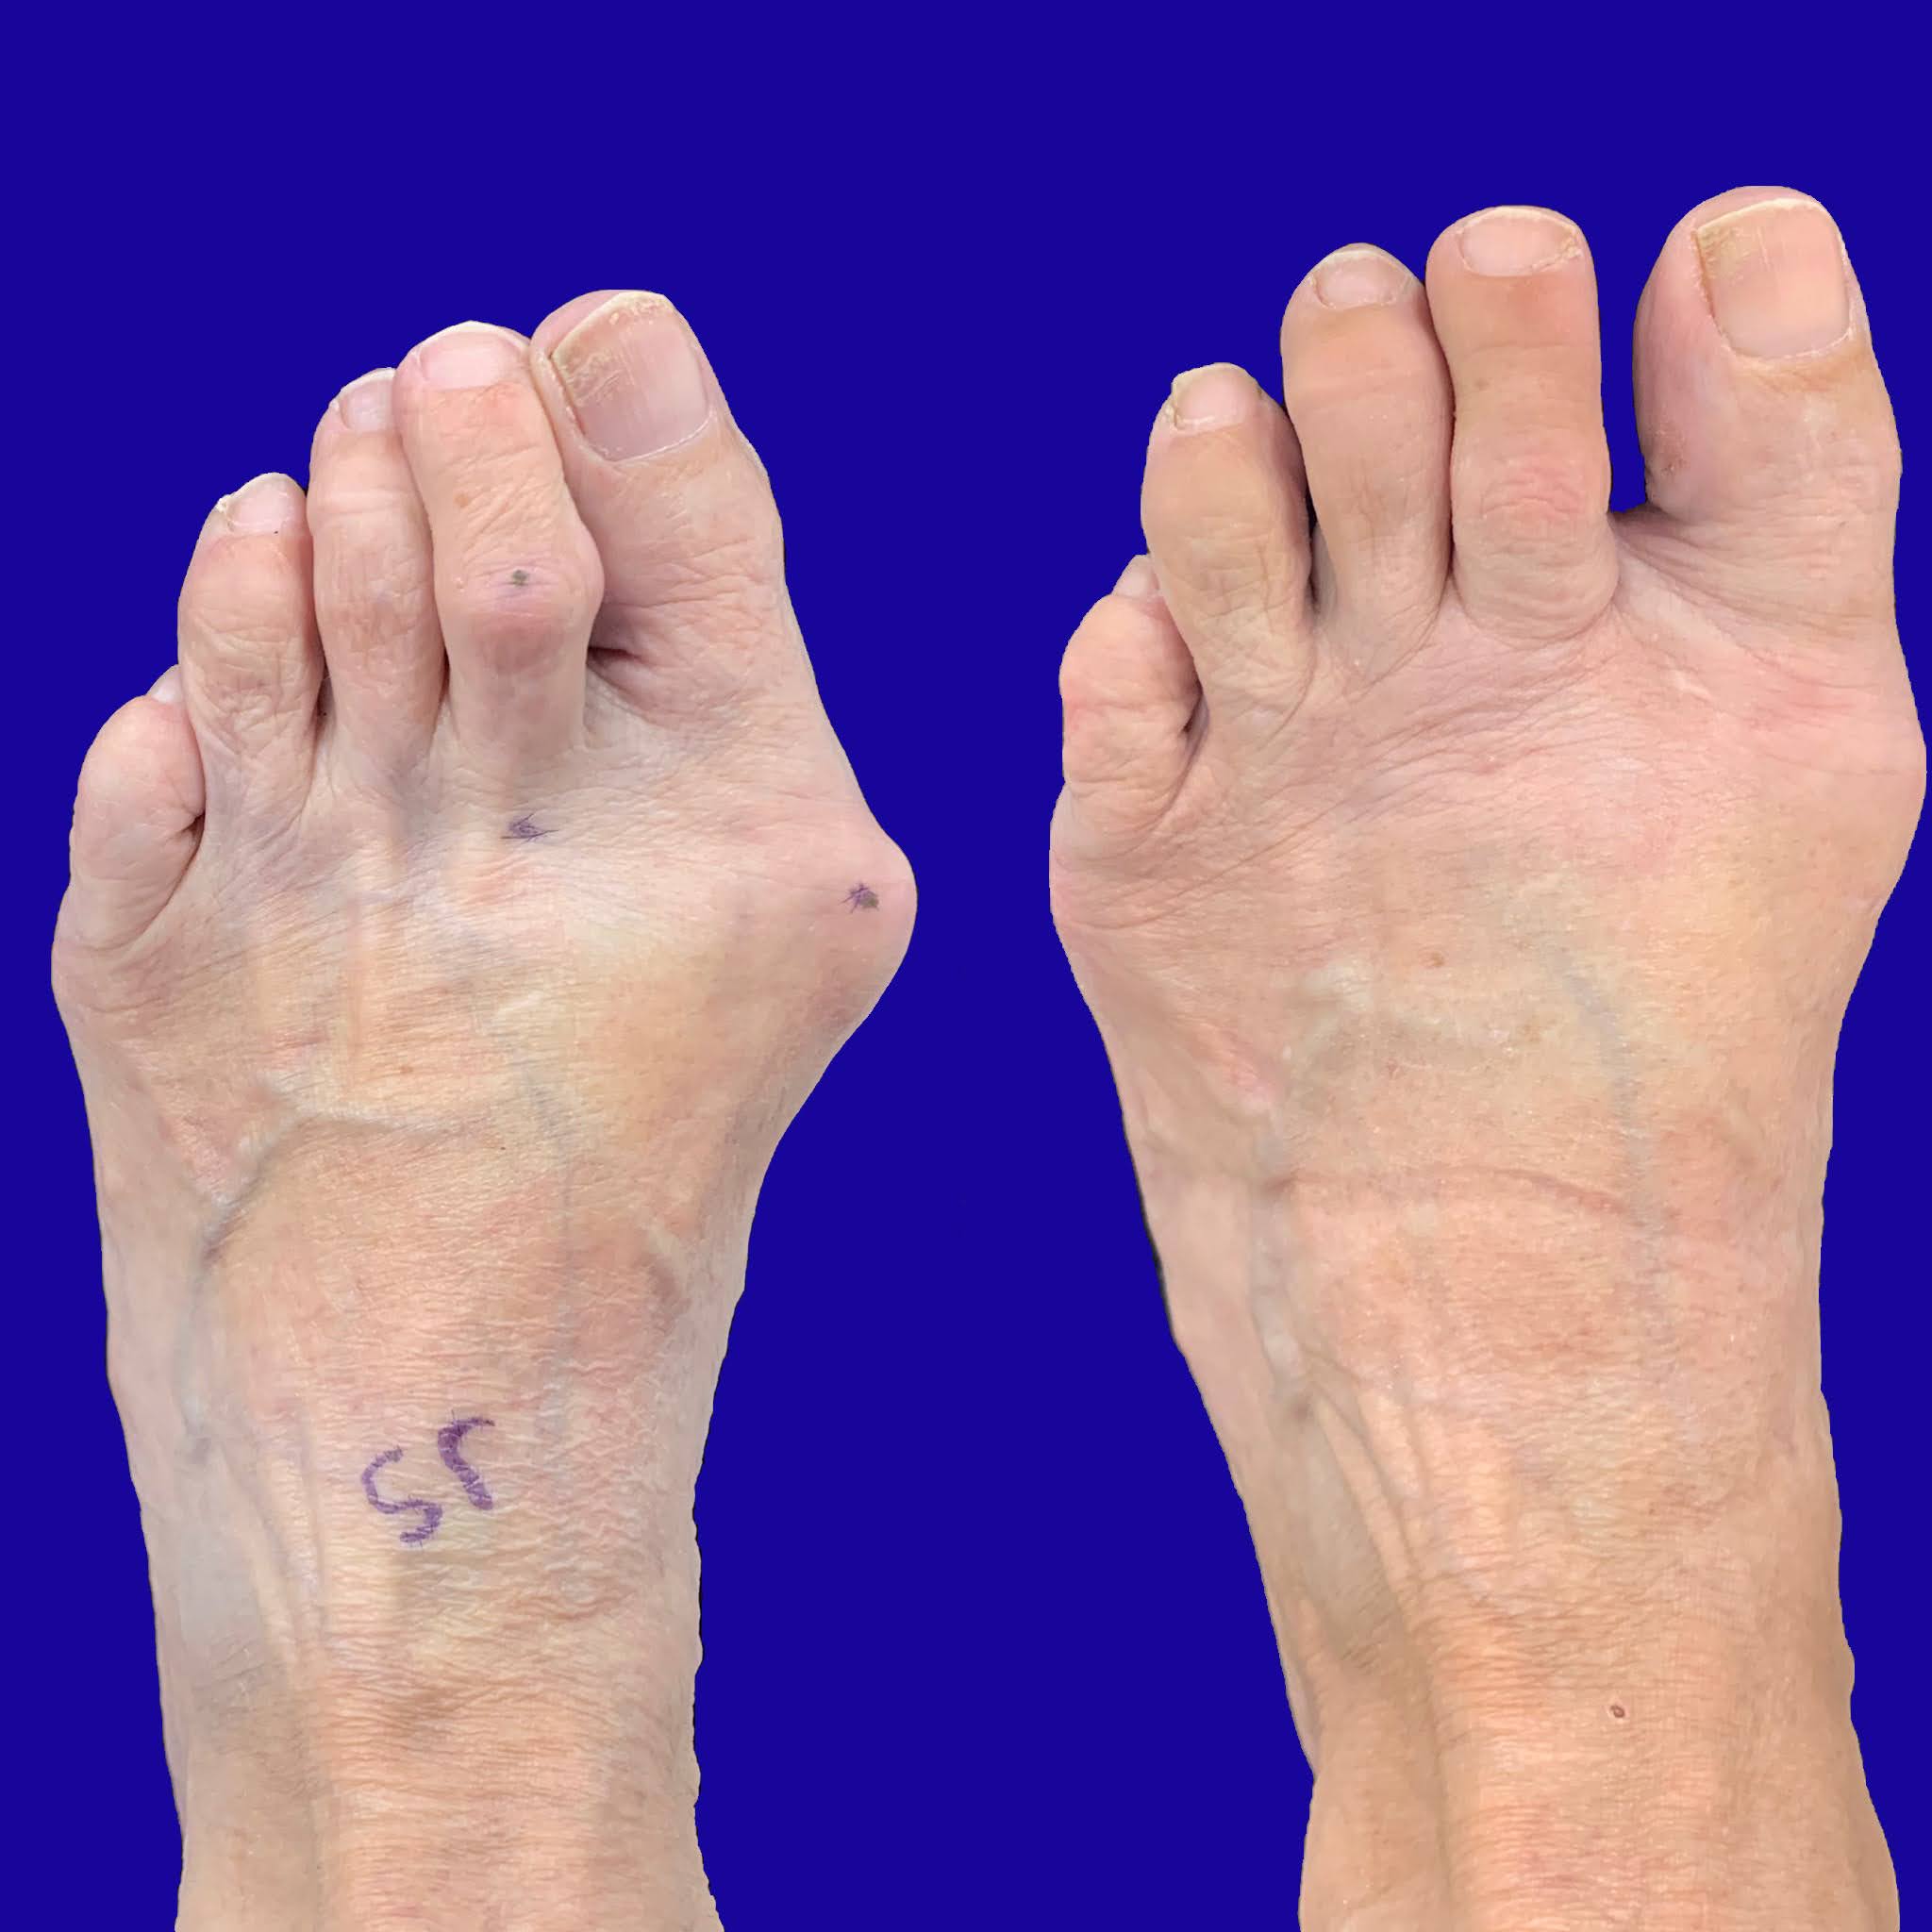 How bad do bunions have to be before surgery?